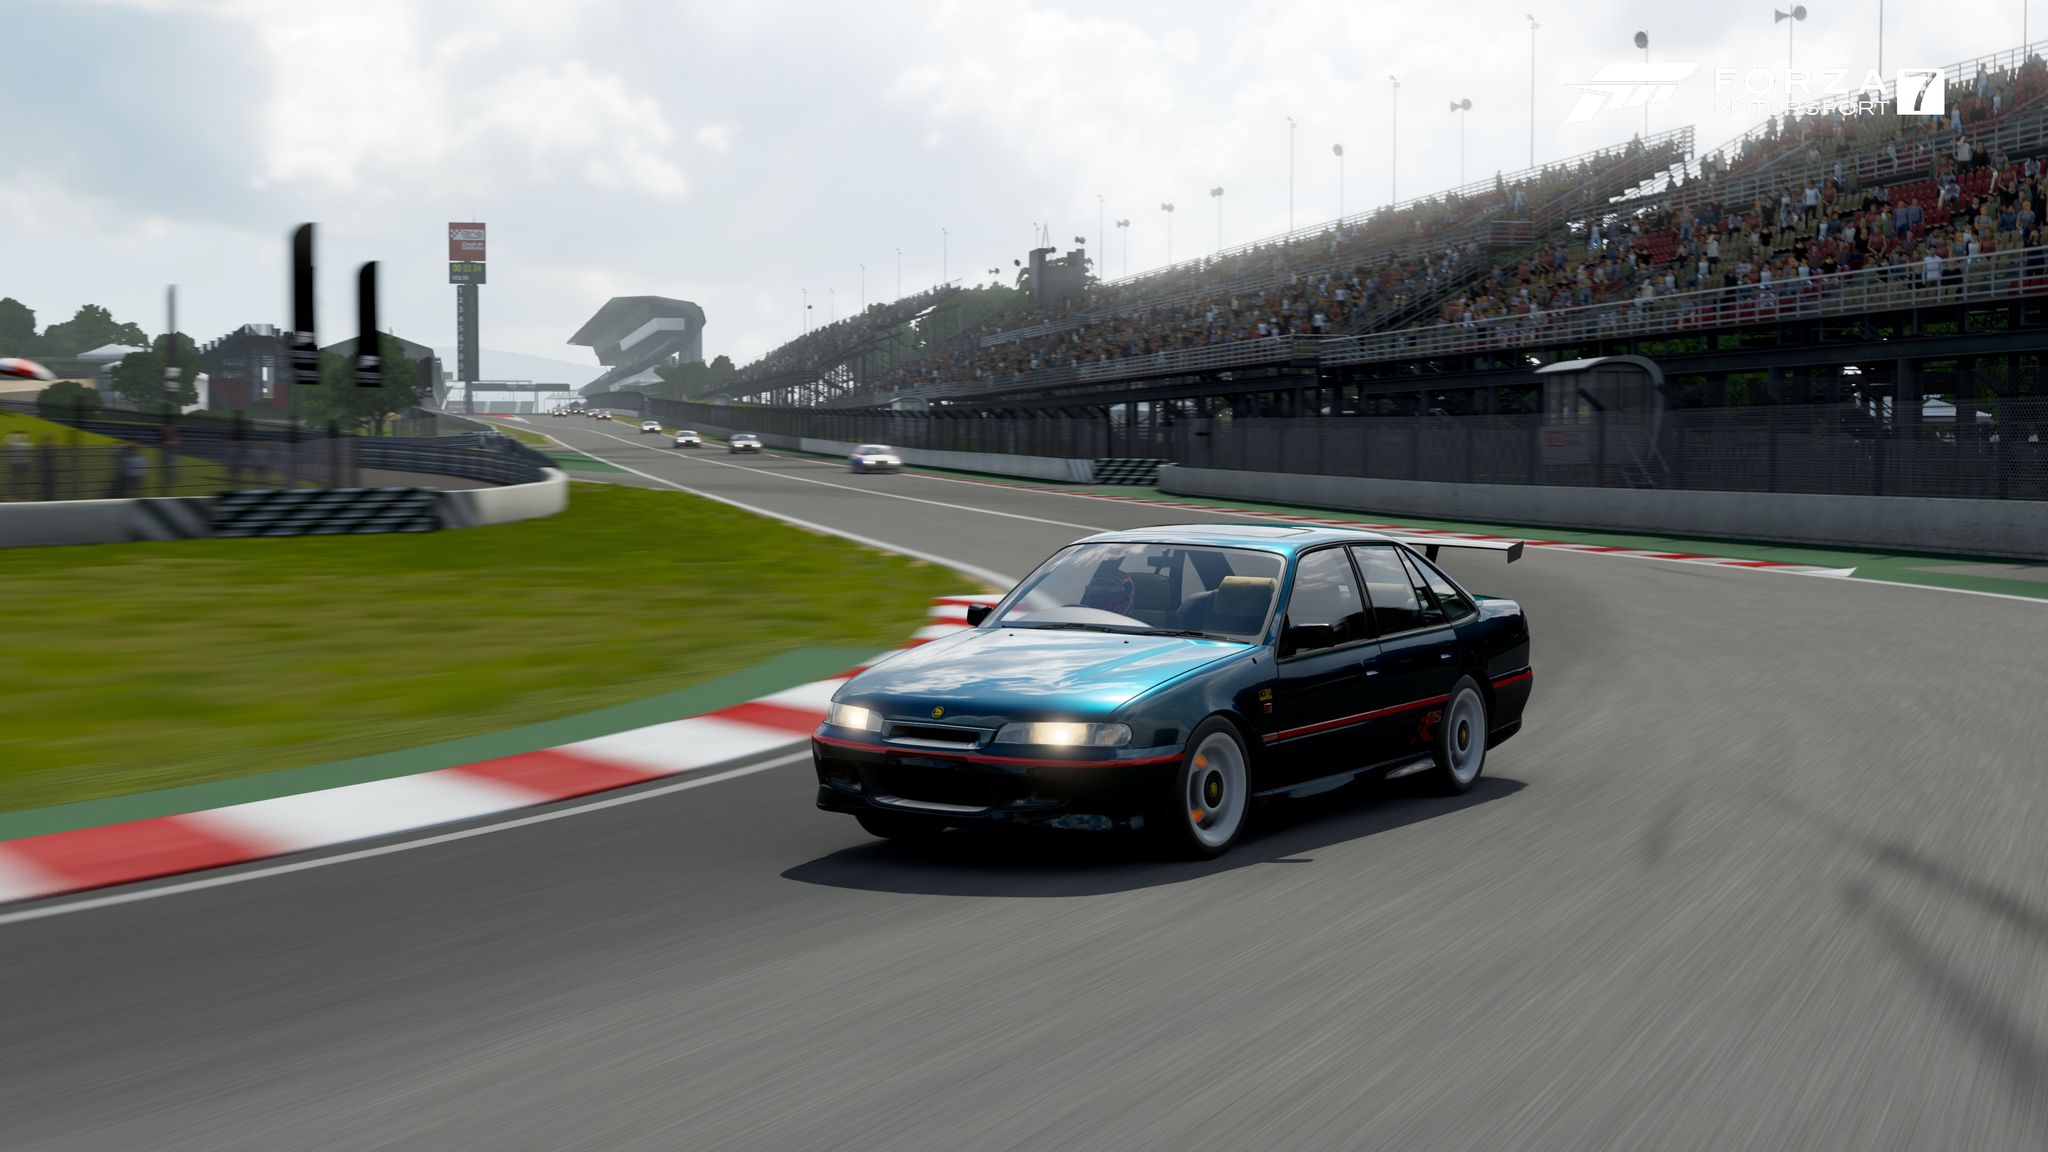 A screenshot from Forza Motorsport 7 on the Xbox One showing a 1996 Holden HSV GTSR going around a corner mid-race.